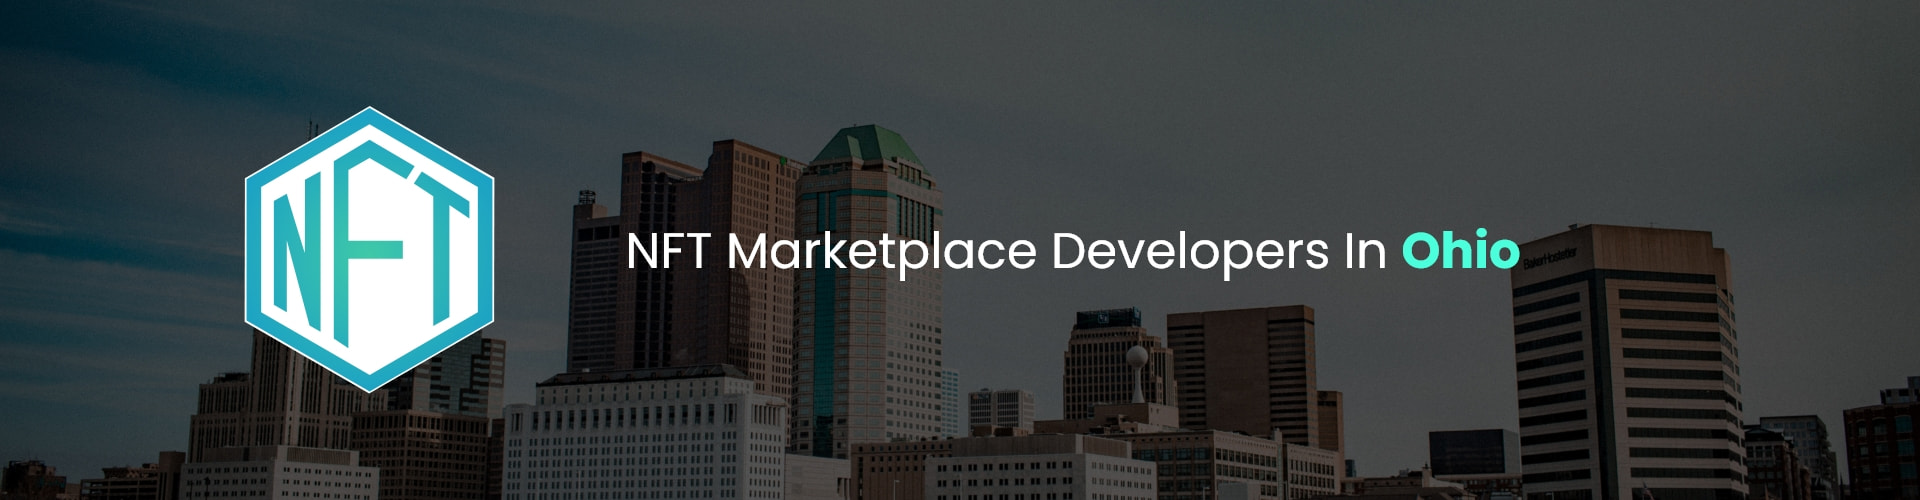 hire nft marketplace developers in ohio